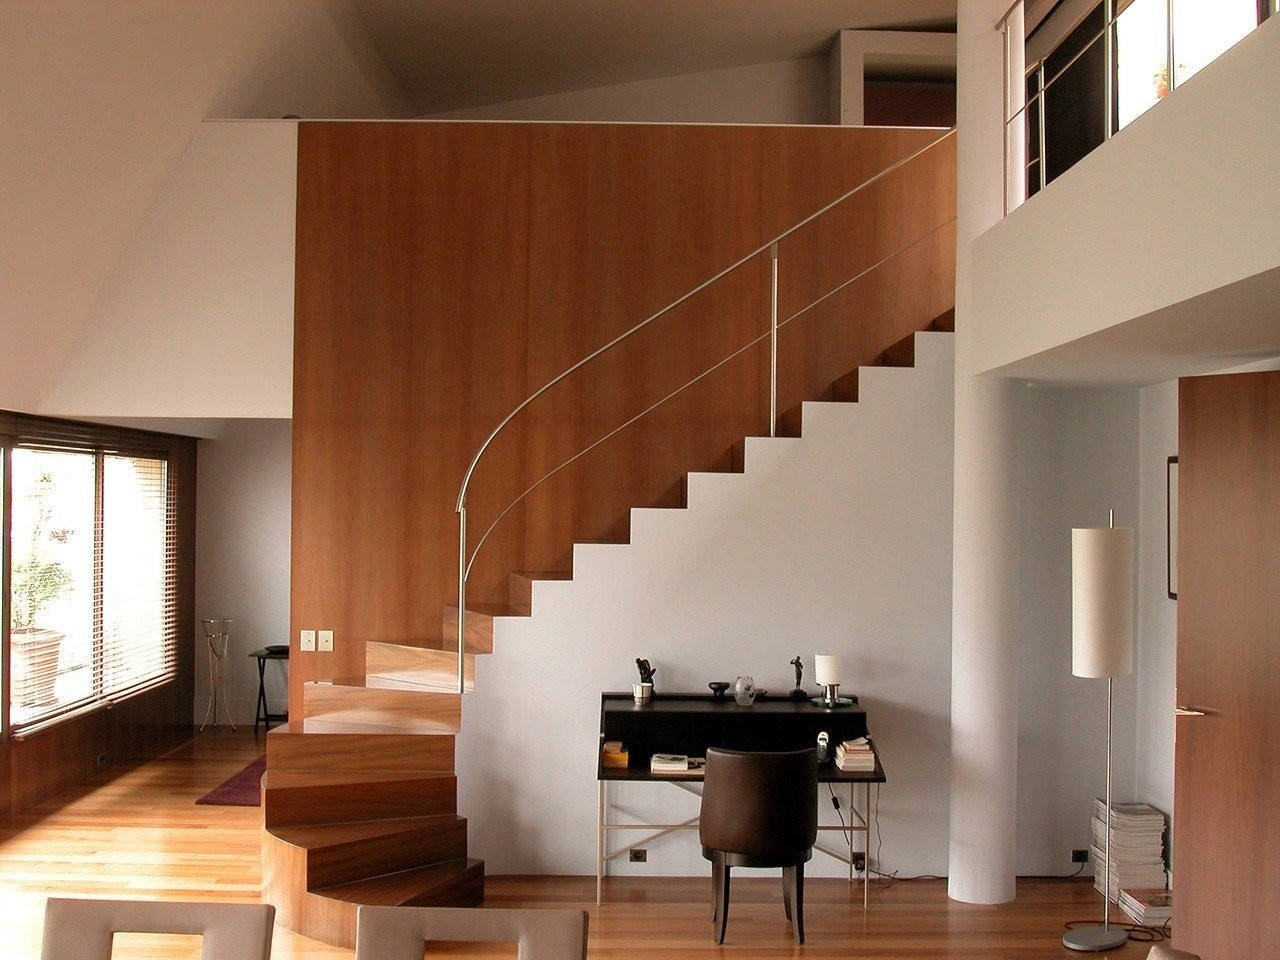 20-astonishing-modern-staircase-designs-youll-instantly-fall-for-19.jpg